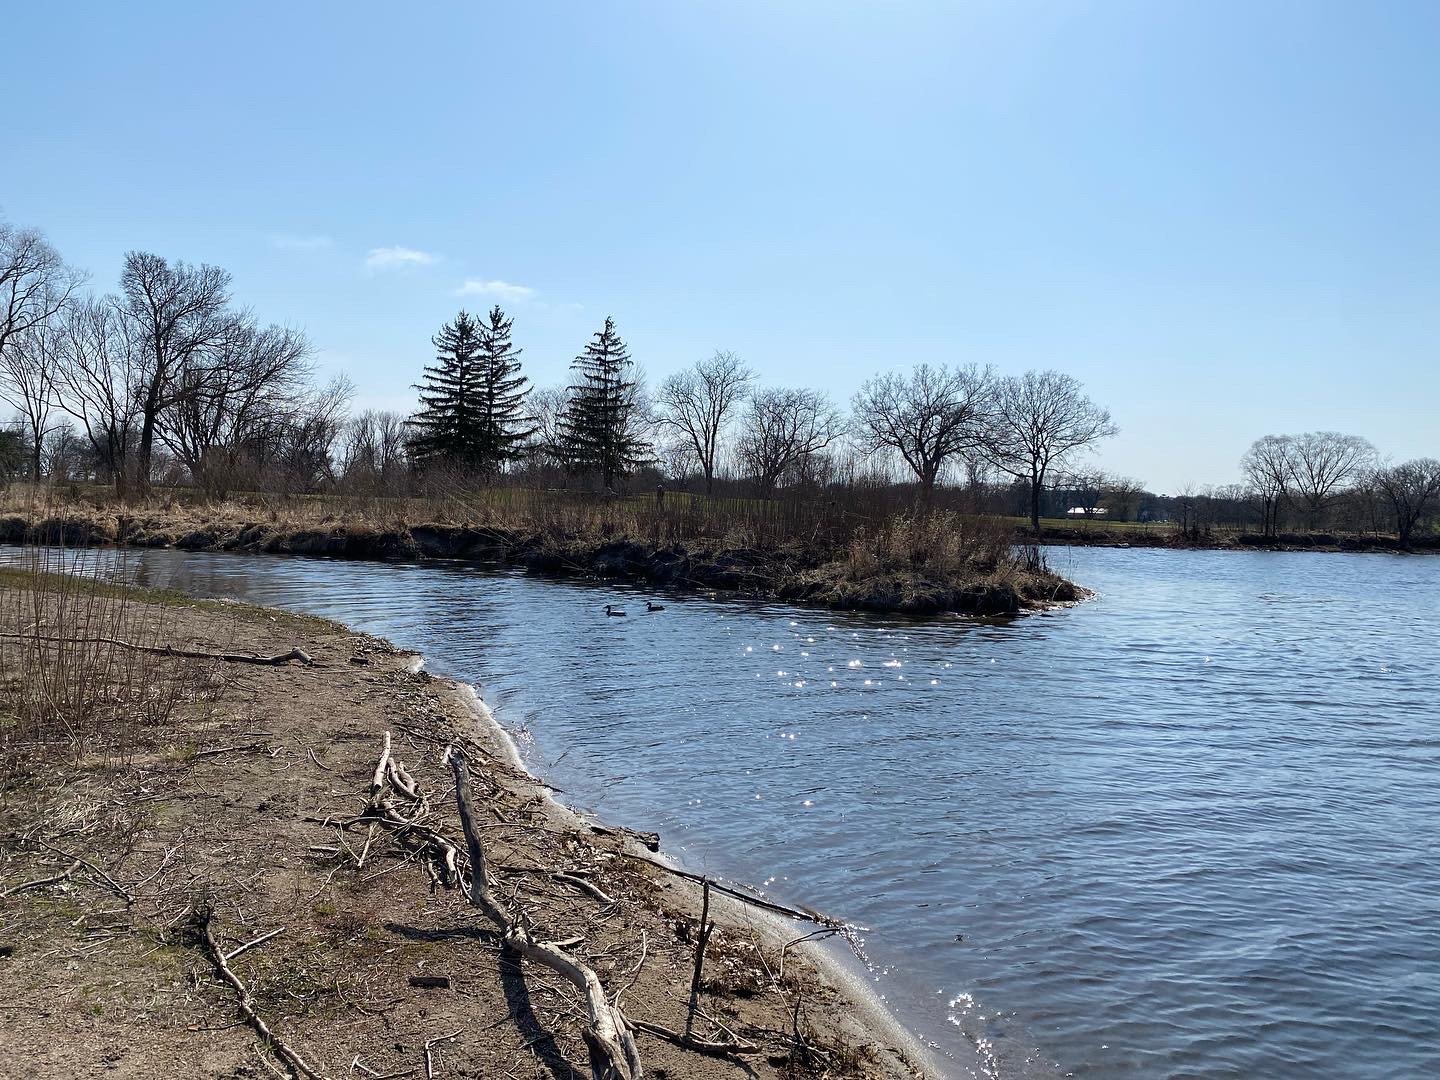 The delta habitat is the heart of the Lake Hiawatha’s biodiversity, and has been the focus of countless hours of community restoration work. Friends of Lake Hiawatha have worked for years with Dakota friends to restore foods and medicines obliterated from this land in 1929.